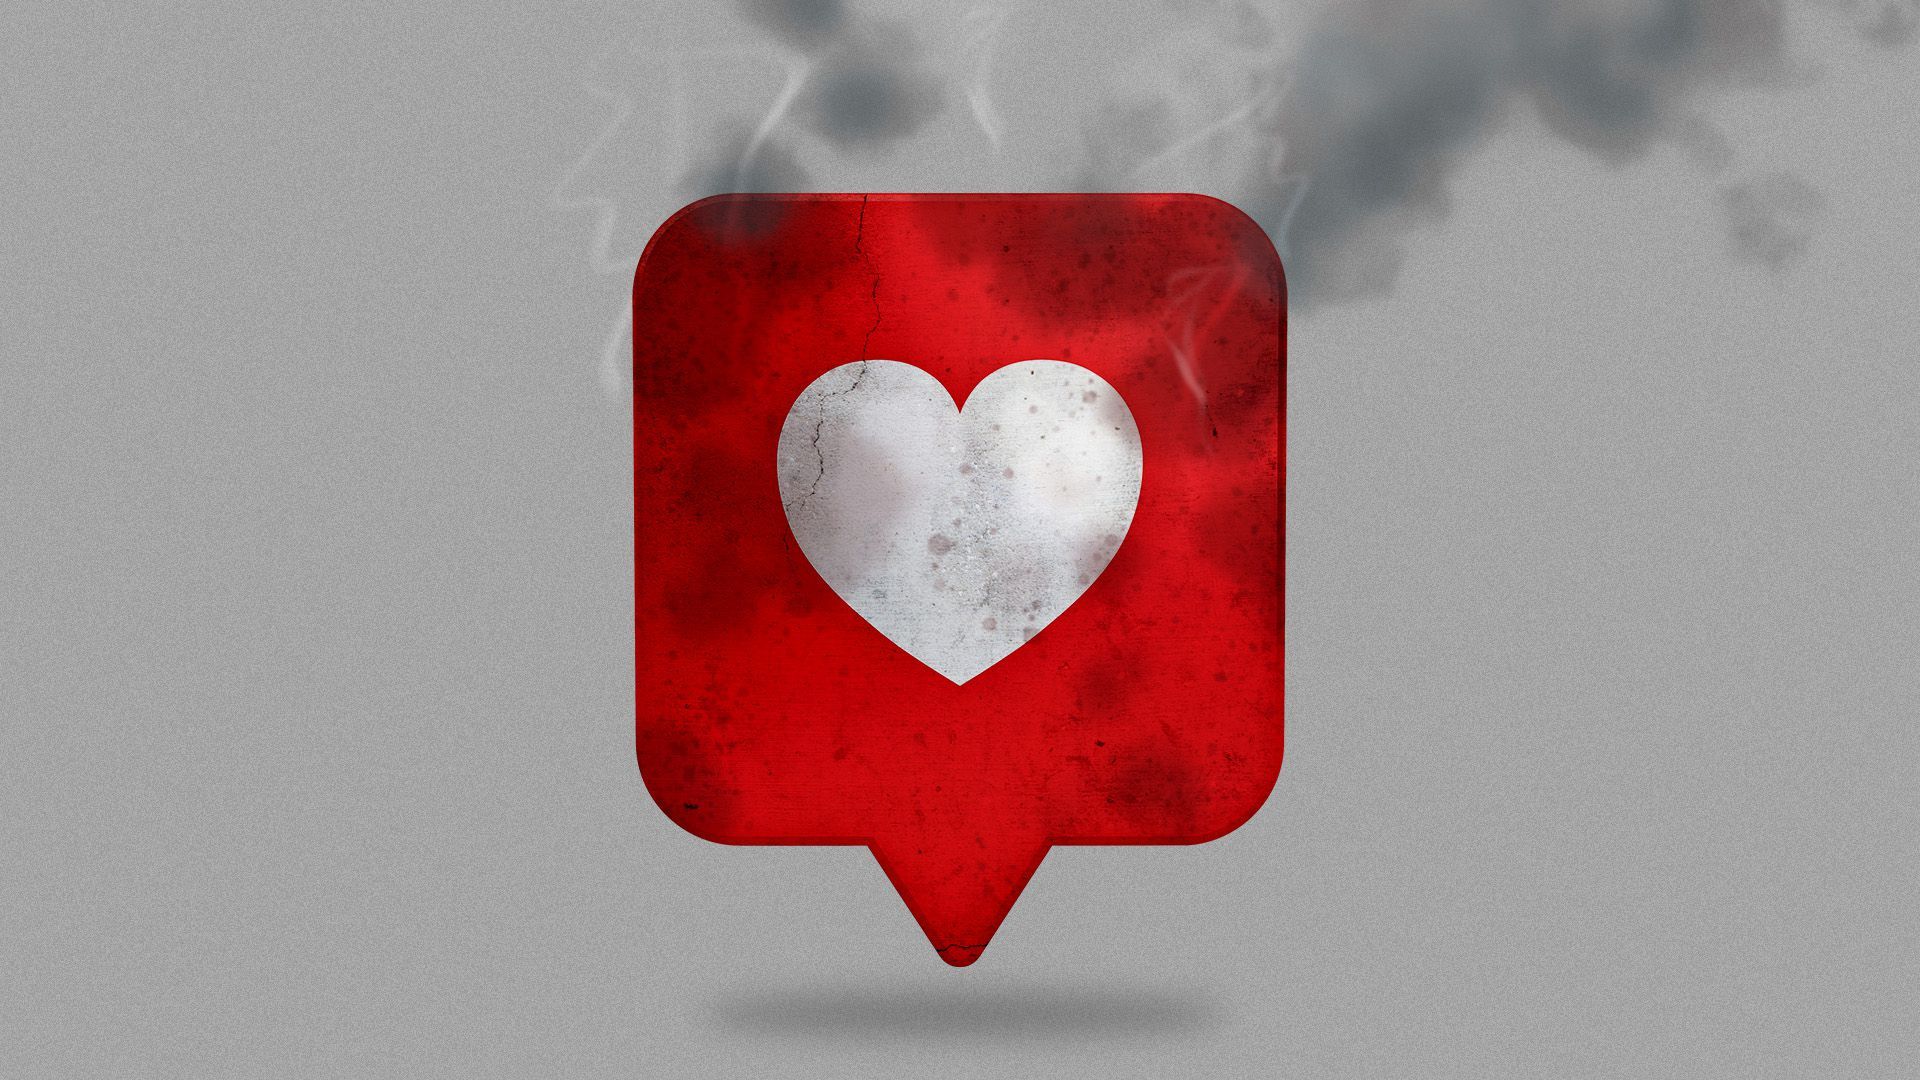 Illustration of a damaged and smoking social media heart icon 